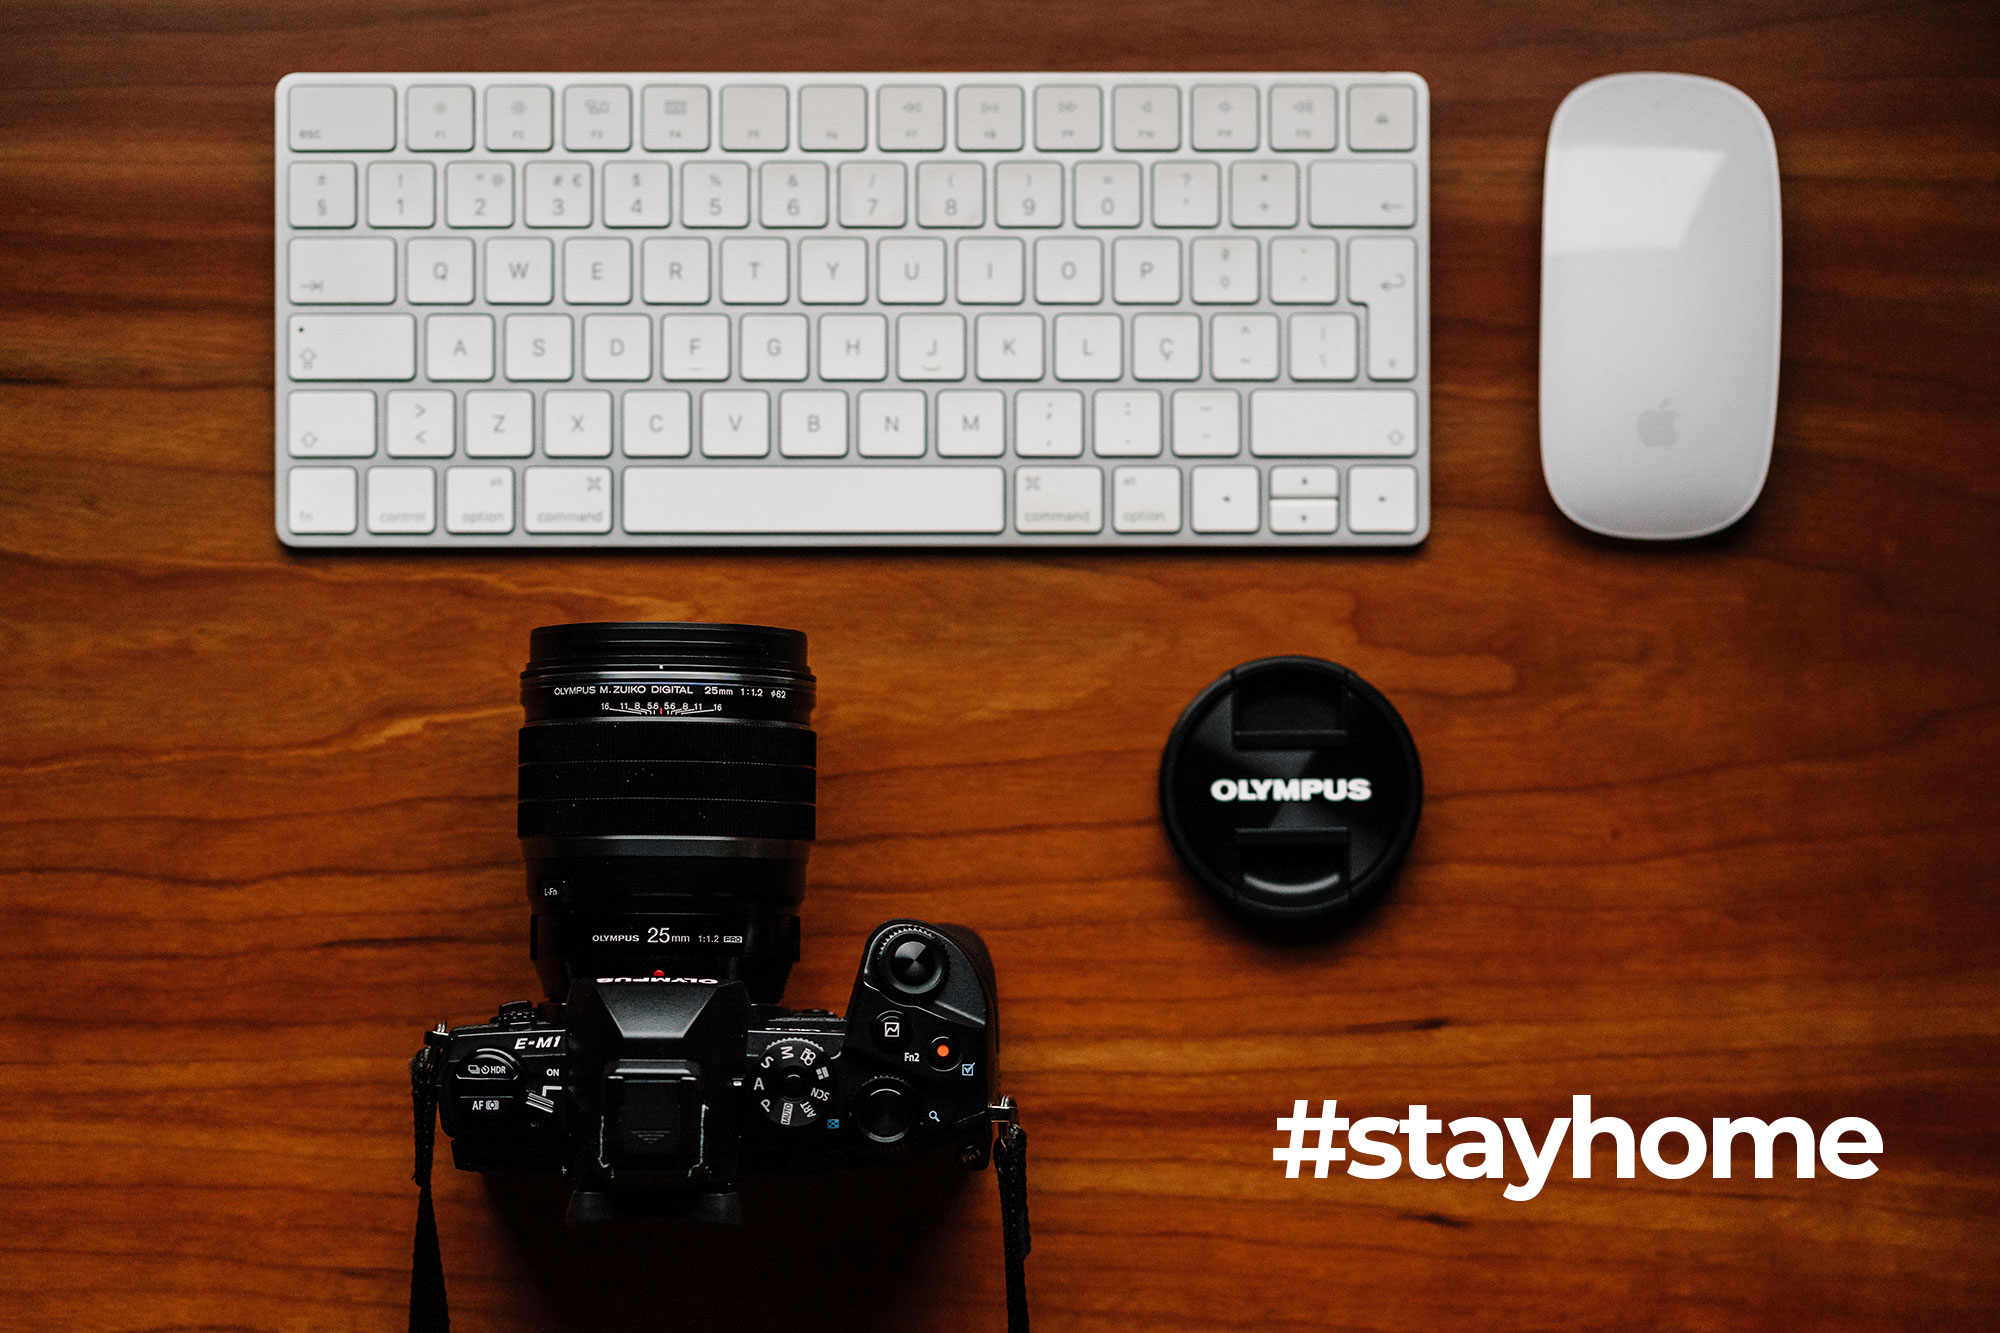 #StayHome with your Olympus – Submit your photos